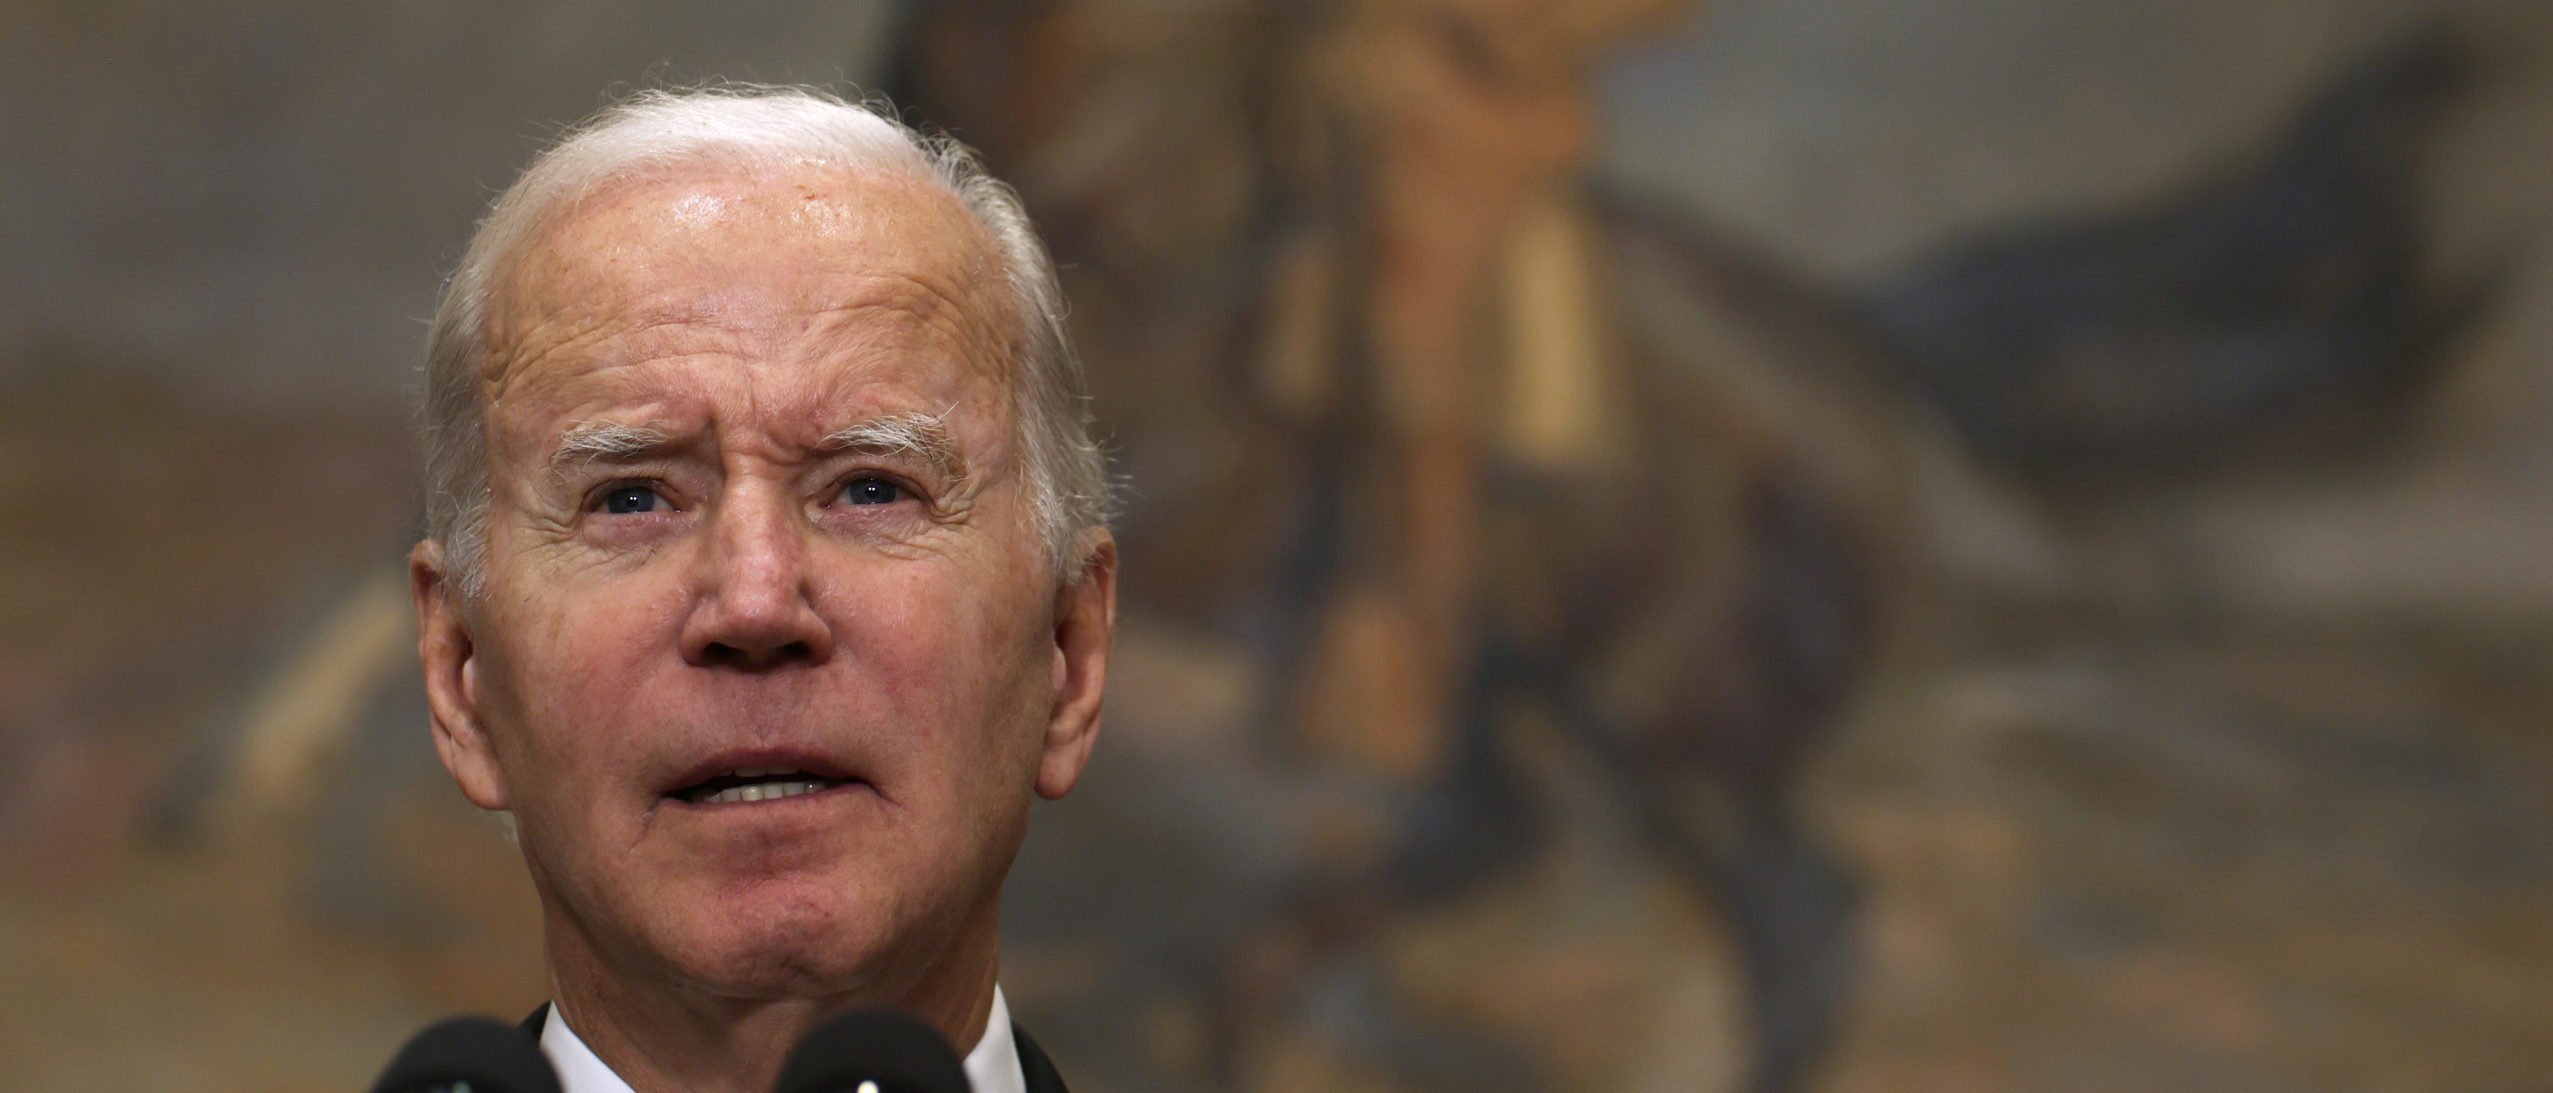 oe Biden Wants To Oust ‘Privilege’ From College Admissions — Except For His Family：